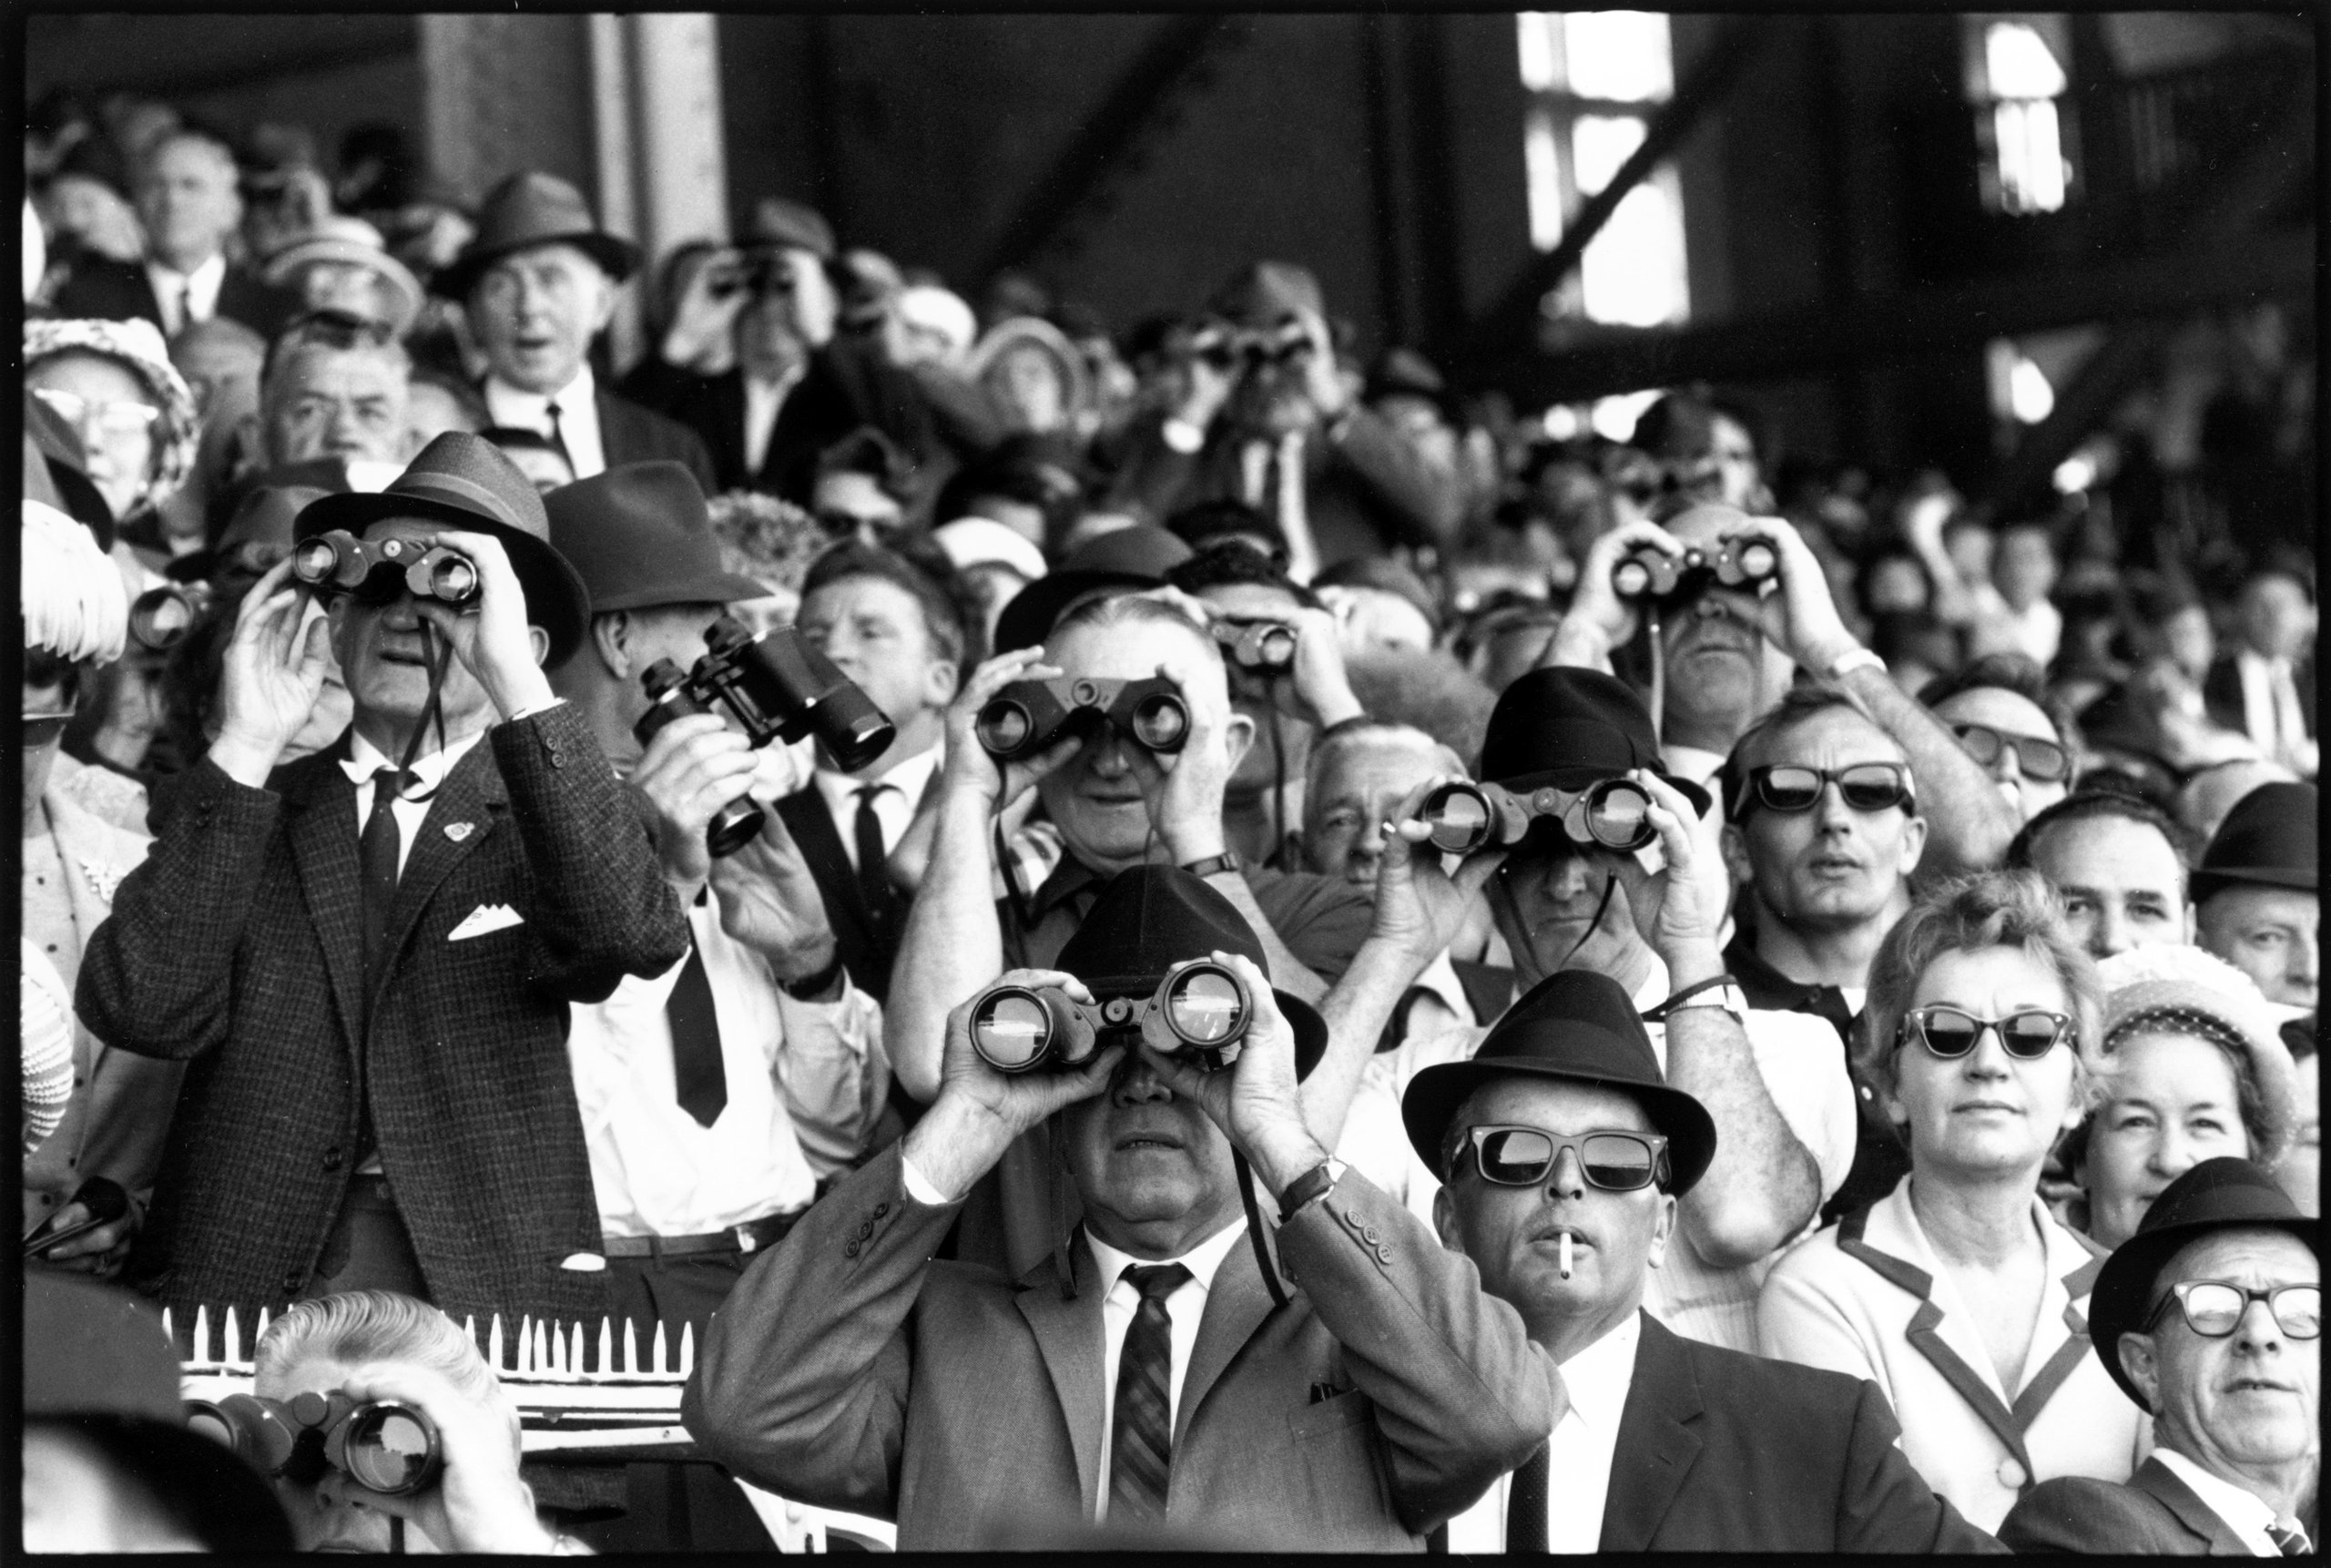 Negatives of spectators at Randwick racecourse photographed by David Mist